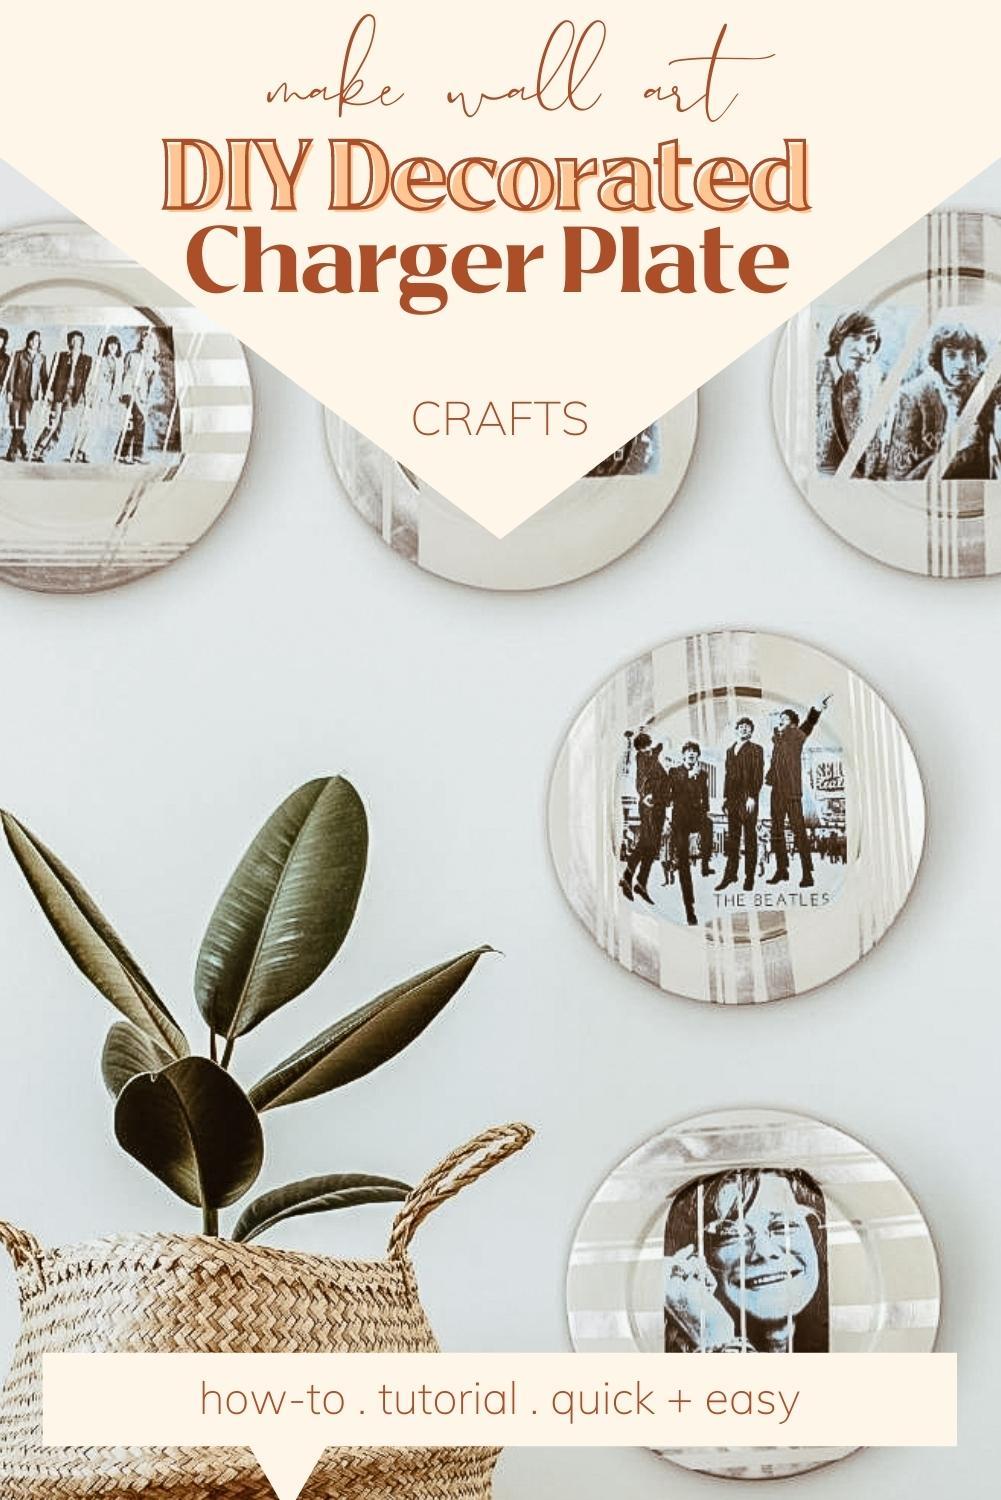 DIY DECORATED CHARGER PLATES